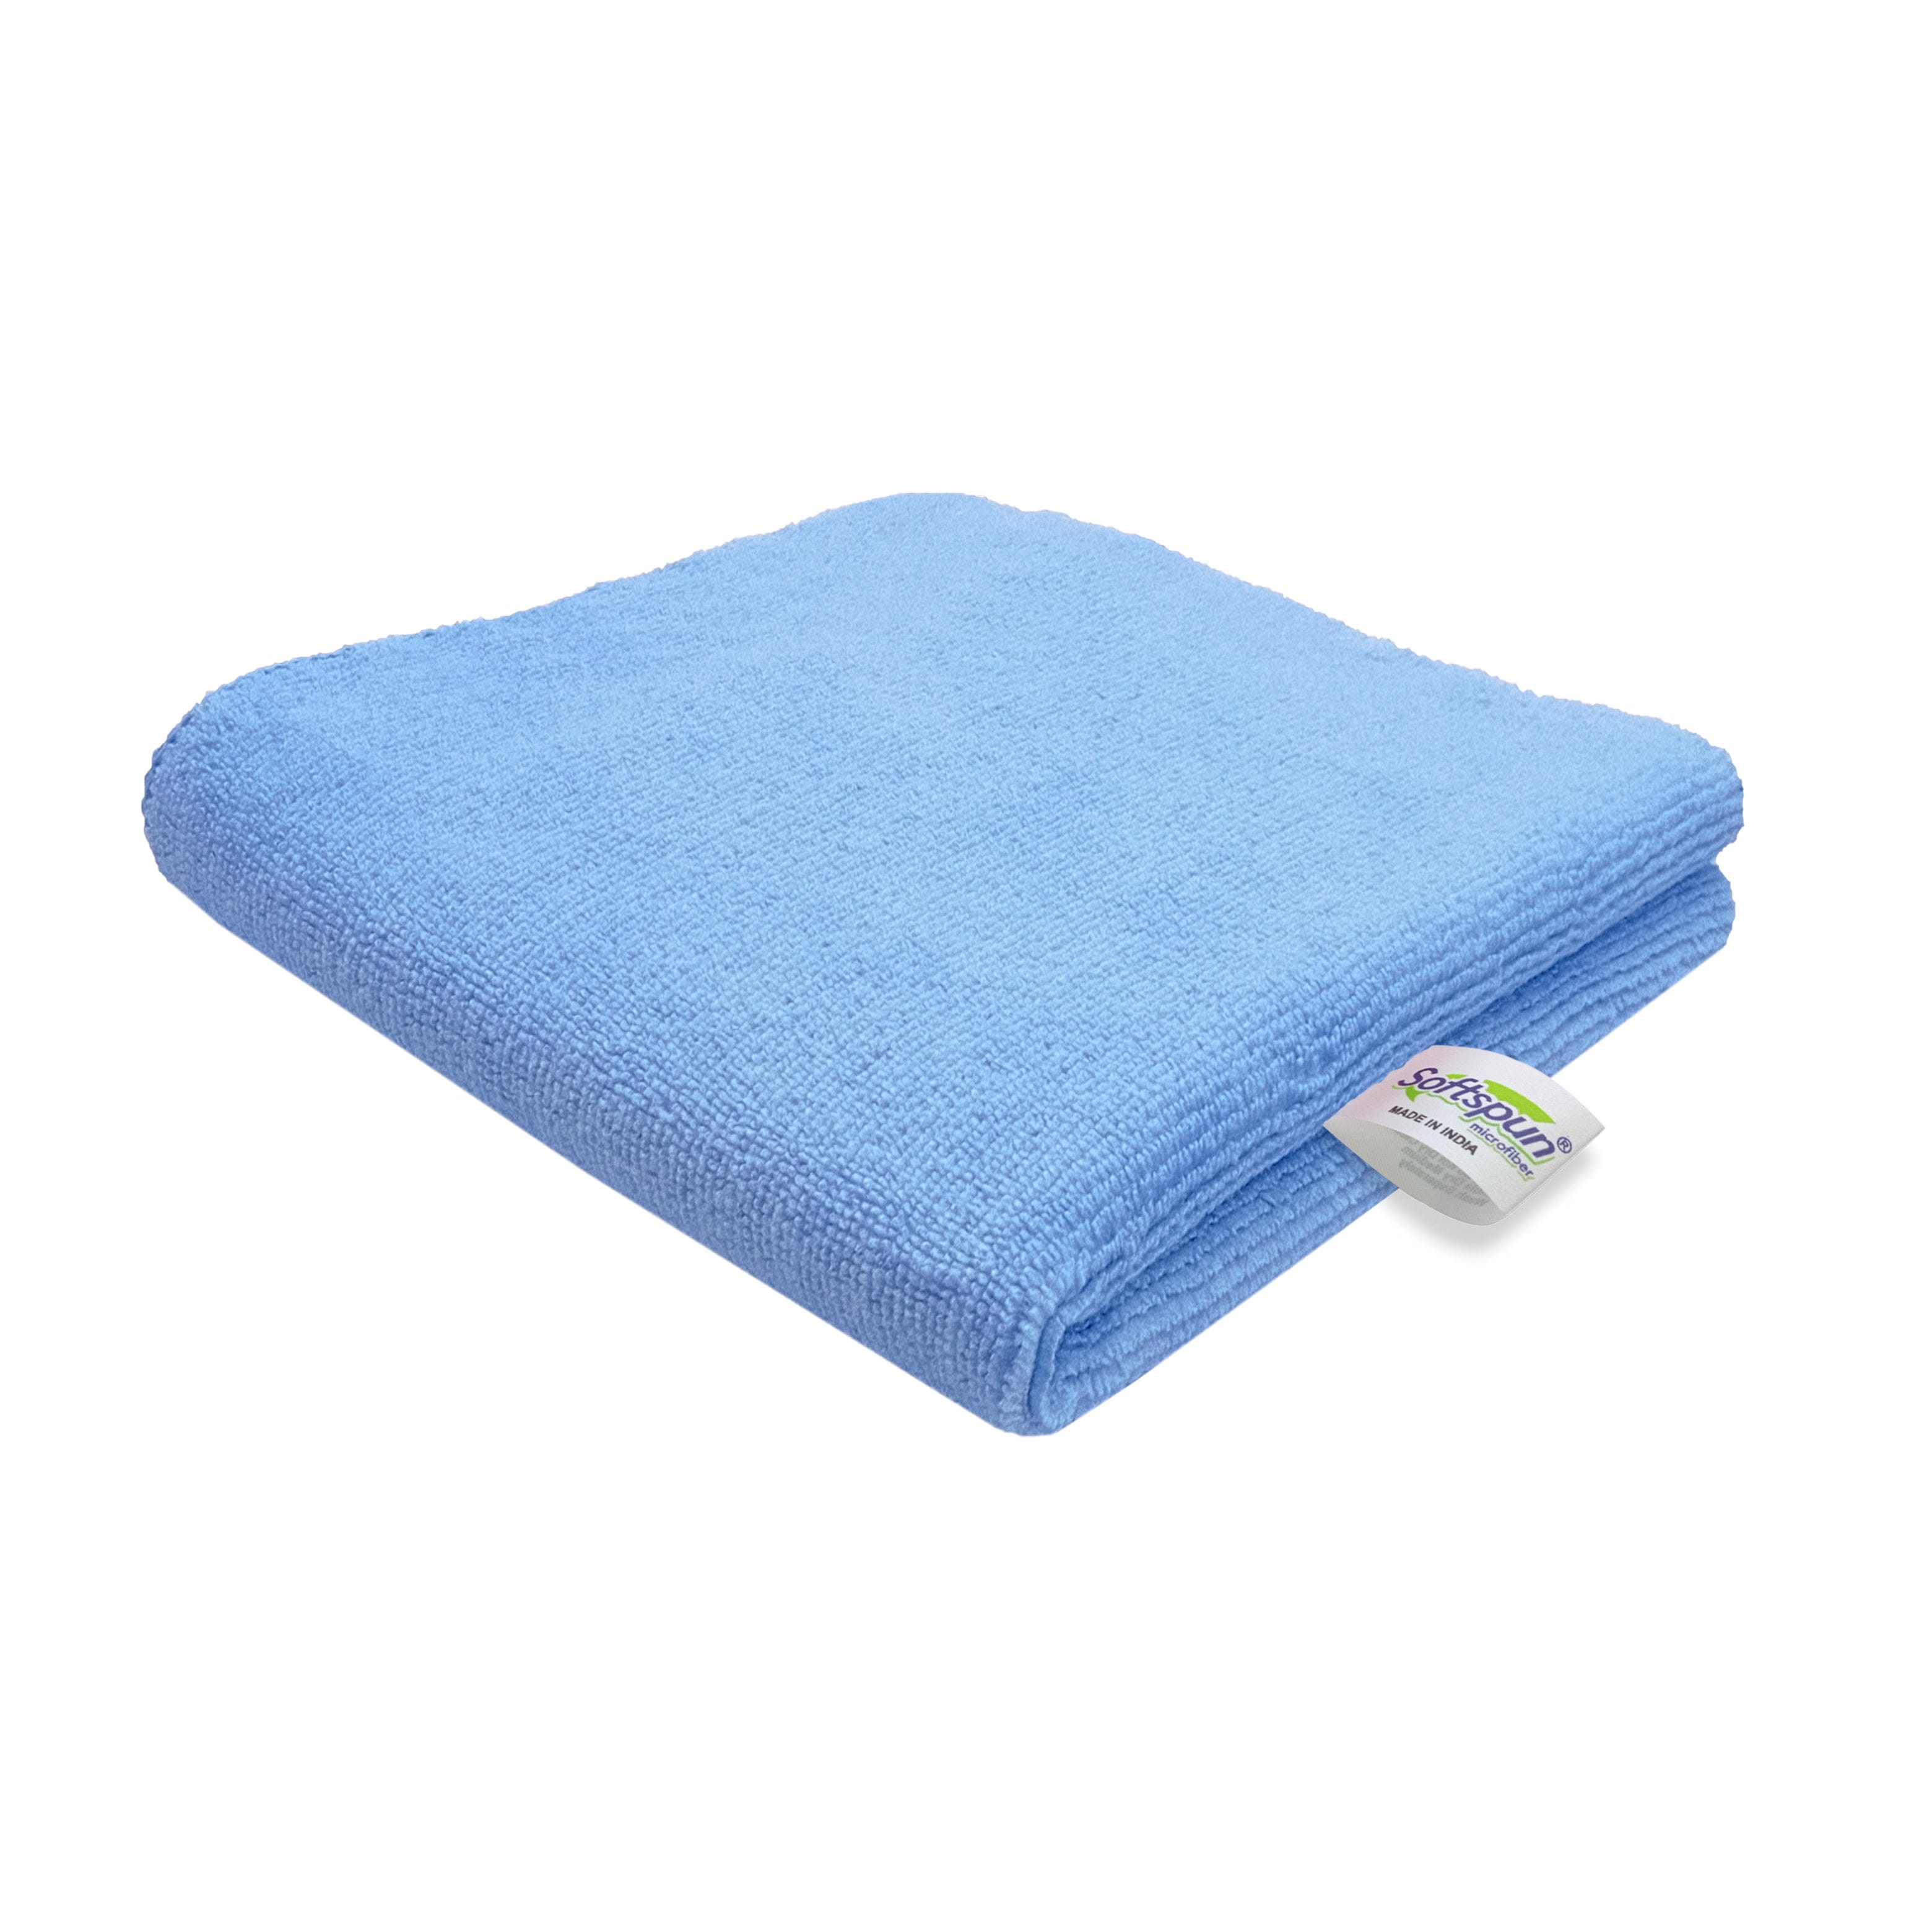 SOFTSPUN Microfiber Cleaning Cloths, Towel Set 340 GSM. Highly Absorbent, Lint and Streak Free, Multi-Purpose Wash Cloth for Kitchen, Car, Window, Stainless Steel, Silverware.